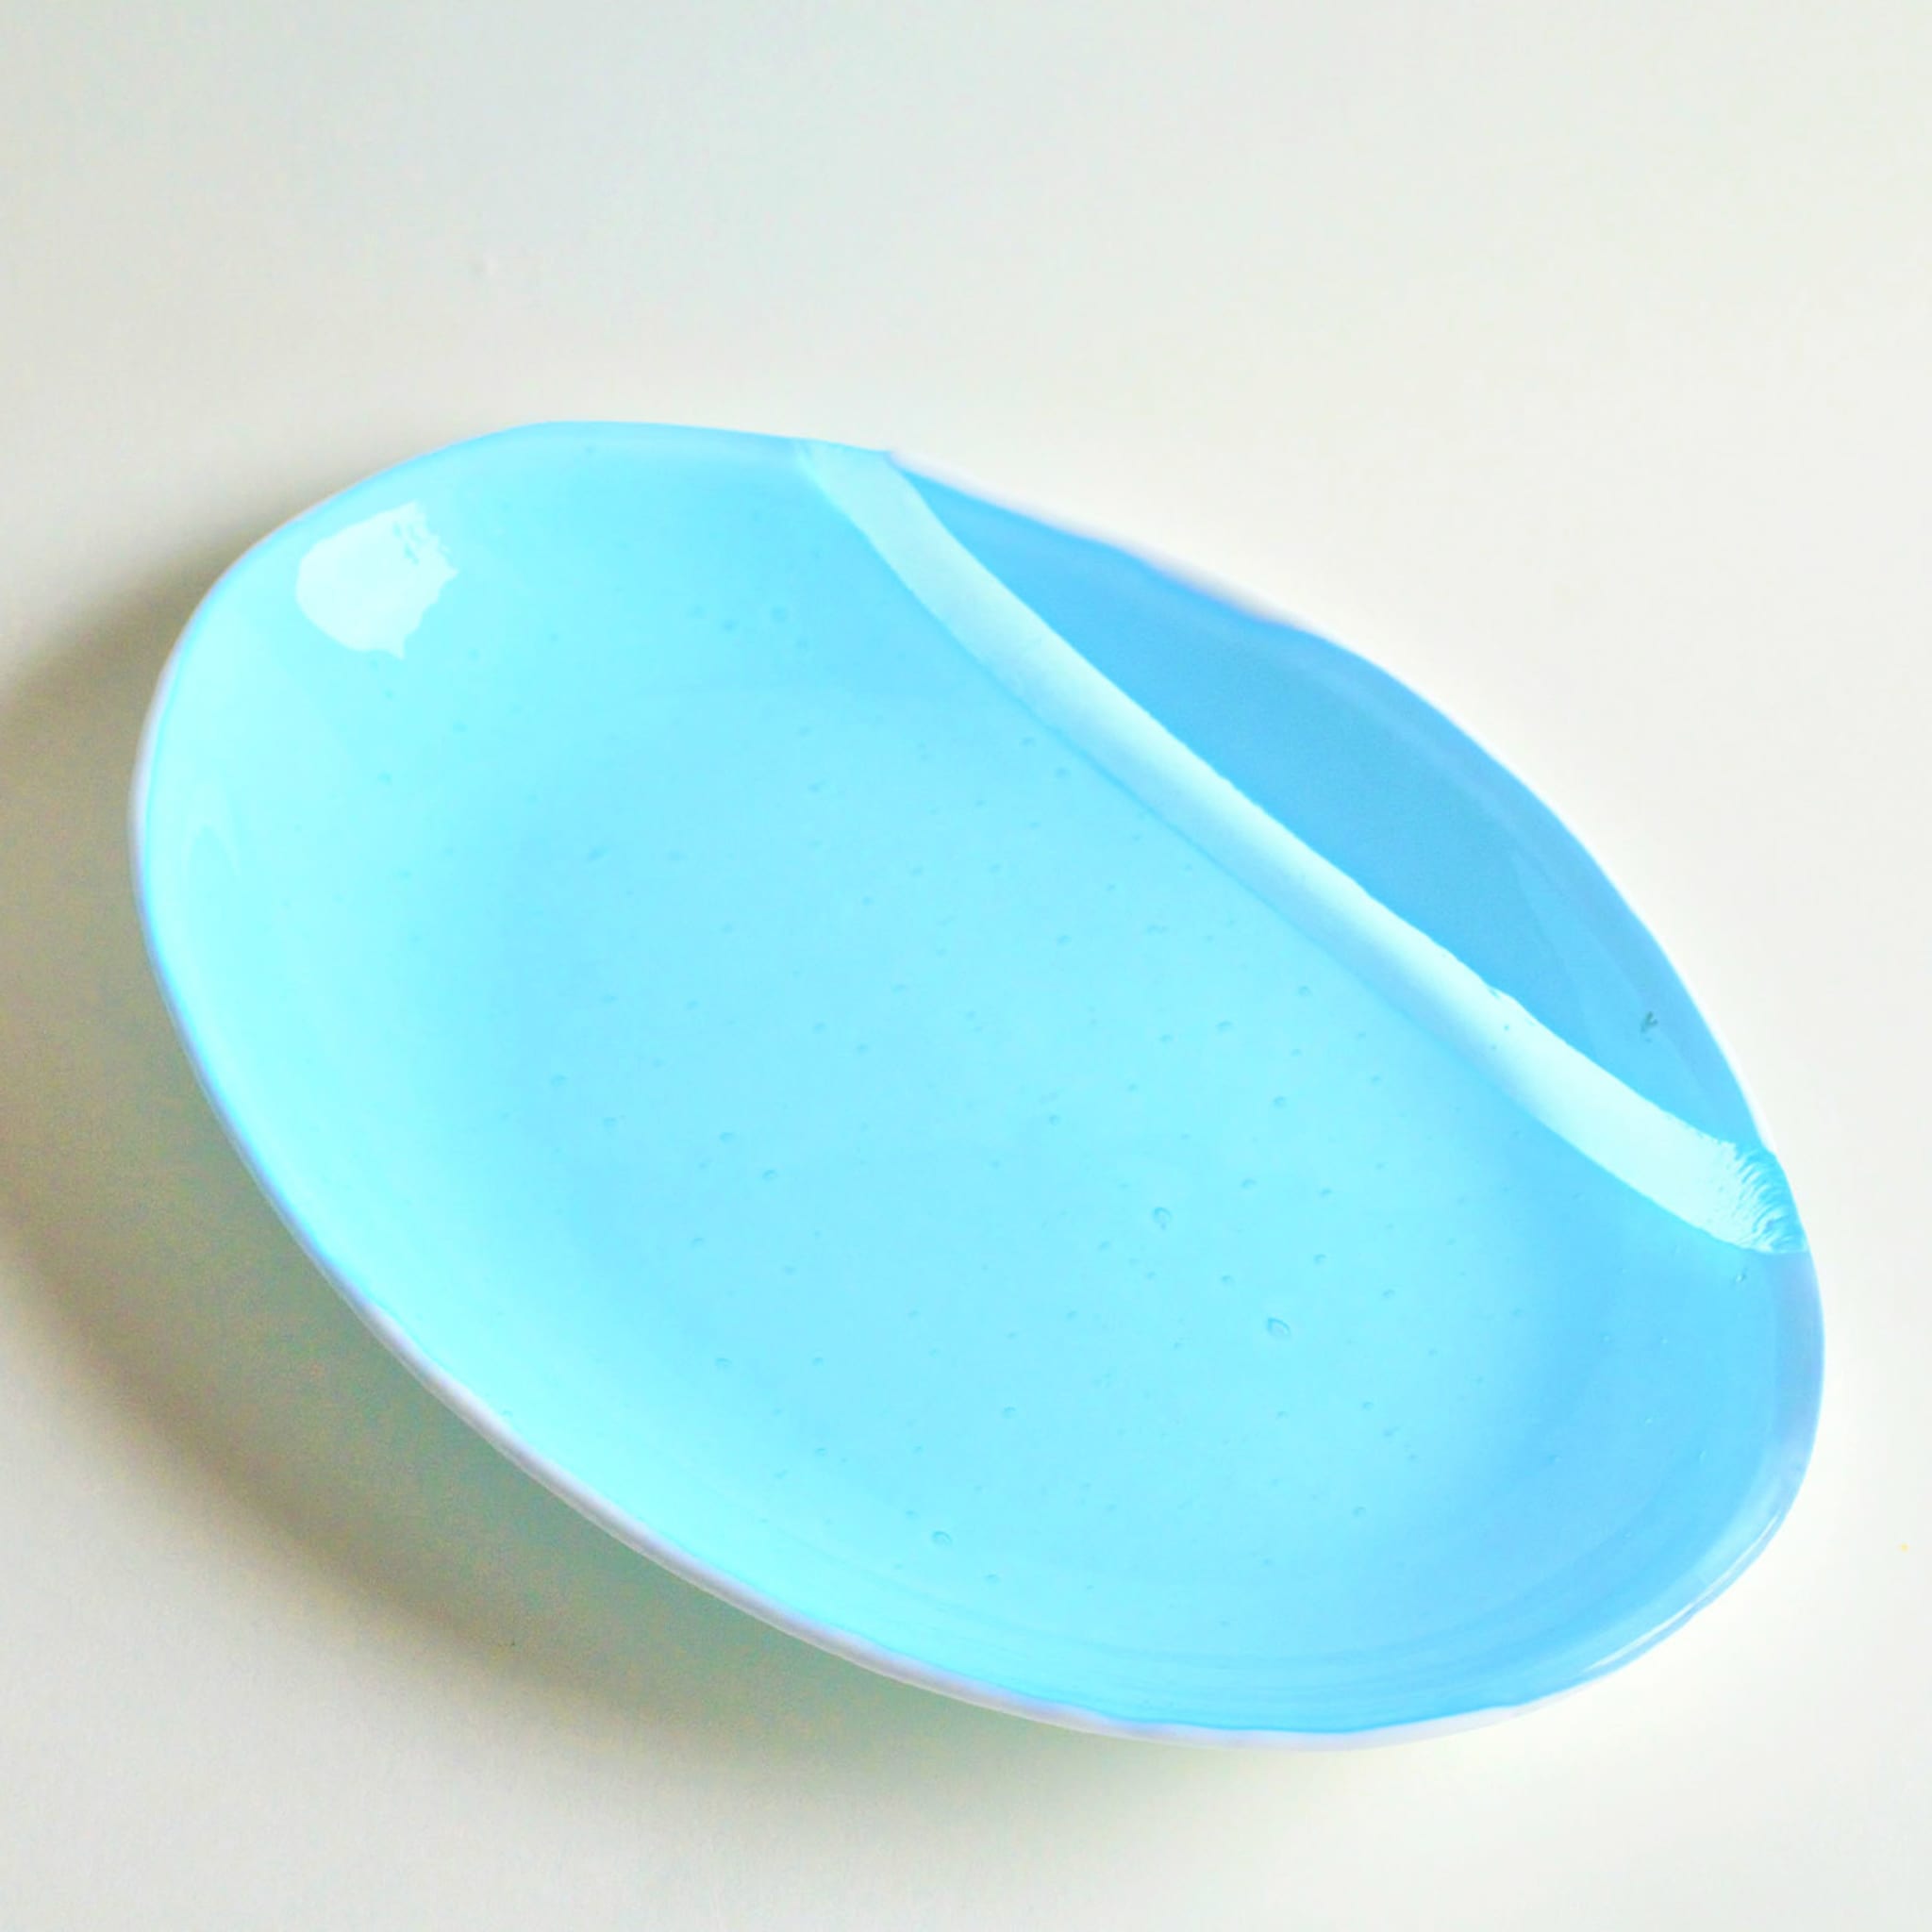 Turquoise Glass Serving Platter - Alternative view 4